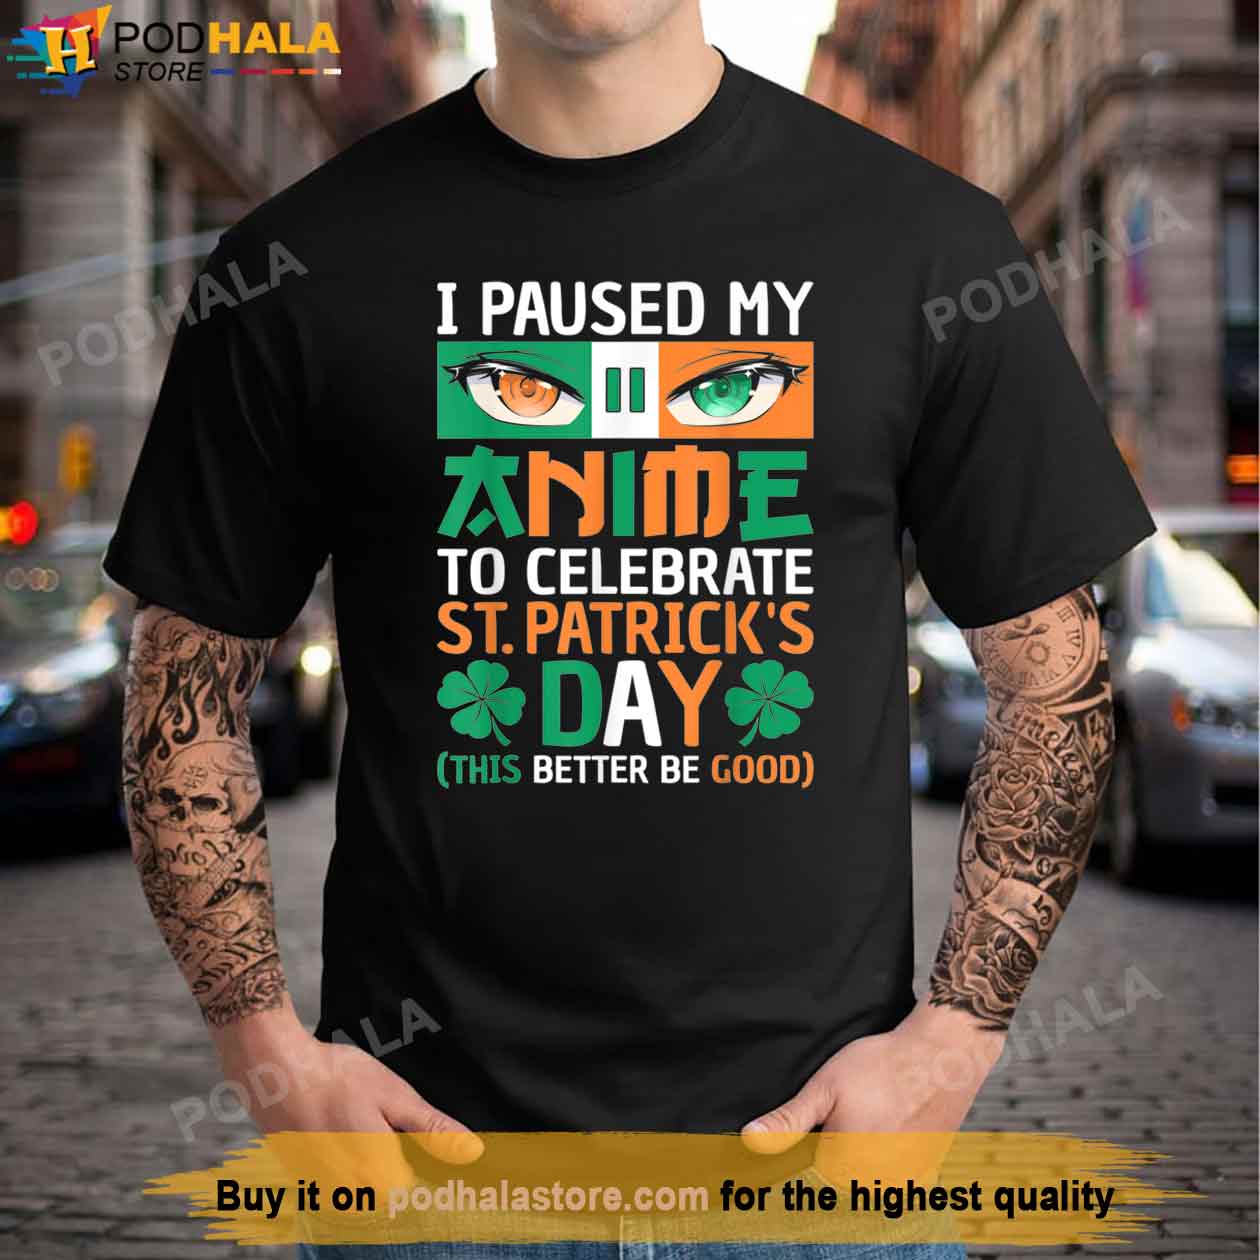 I Paused My Anime To Celebrate St Patricks Day Funny Anime Shirt hoodie  sweater long sleeve and tank top